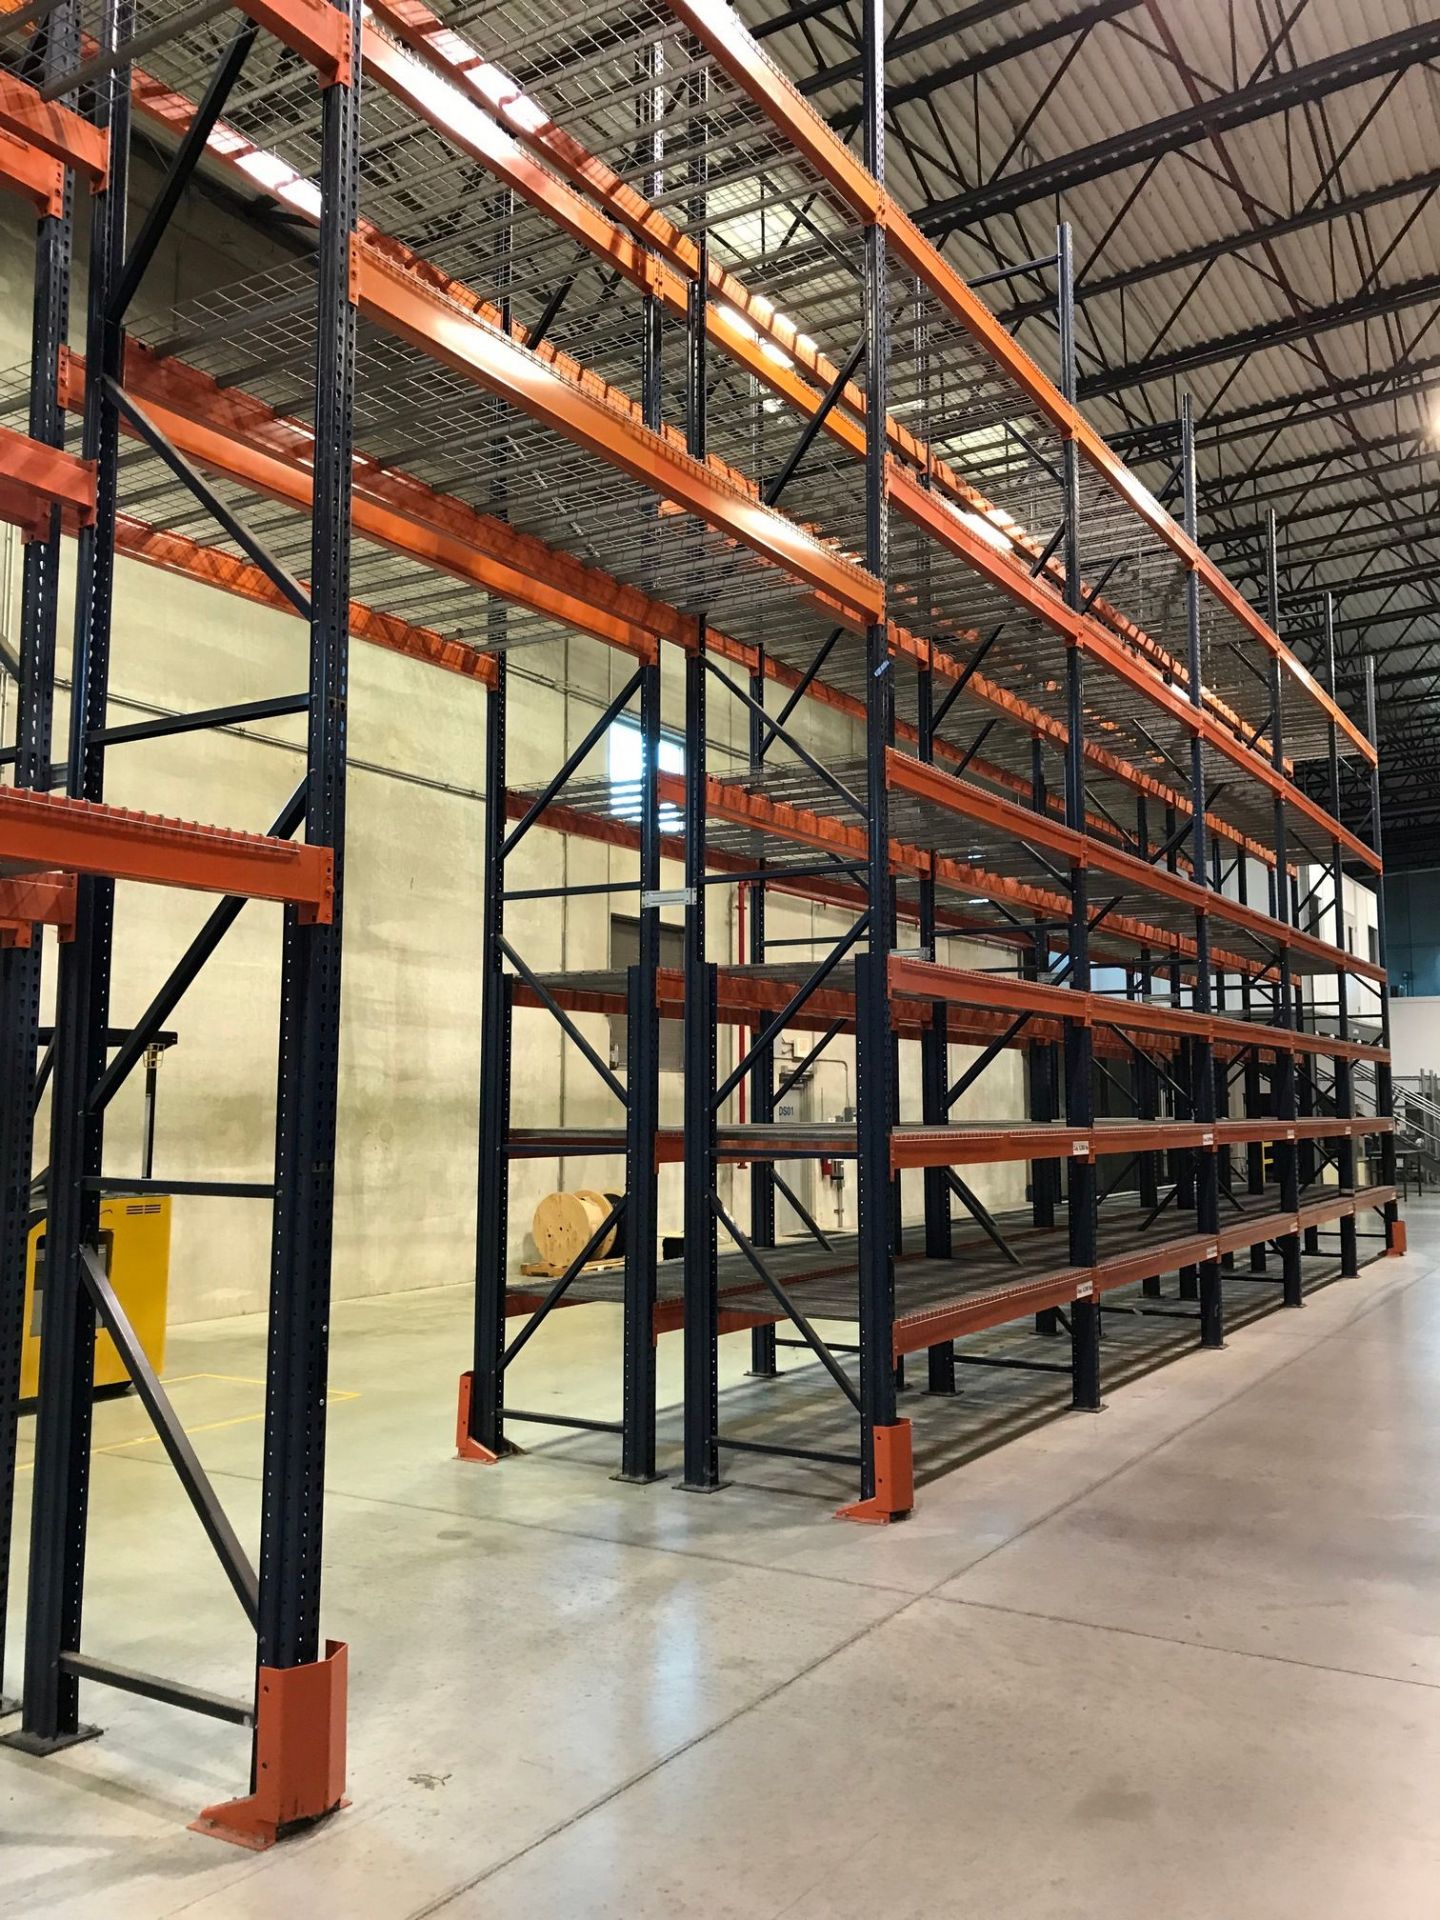 SECTIONS 60" X 108" X 288" TEARDROP TYPE ADJUSTABLE BEAM PALLET RACK WITH WIRE DECKING, 6" HIGH - Image 12 of 16